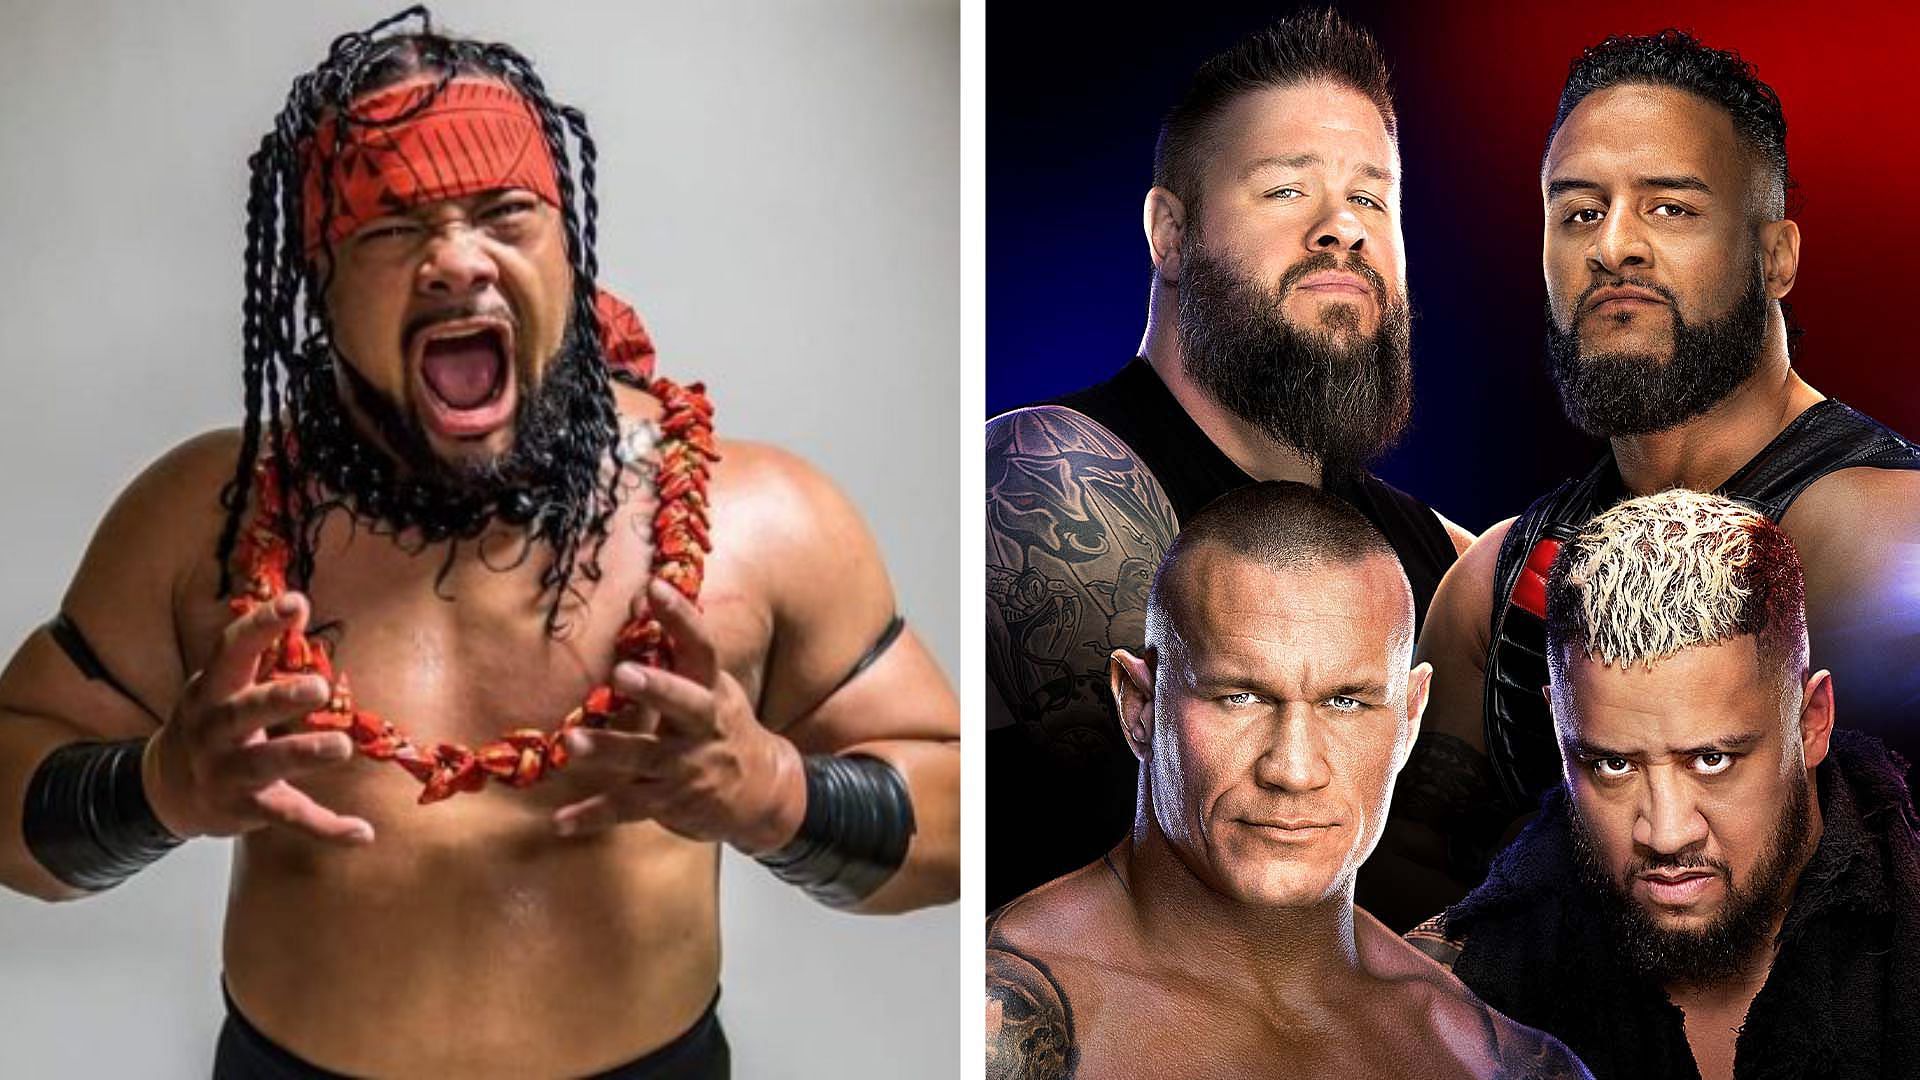 Jacob Fatu could potentially debut at WWE Backlash France